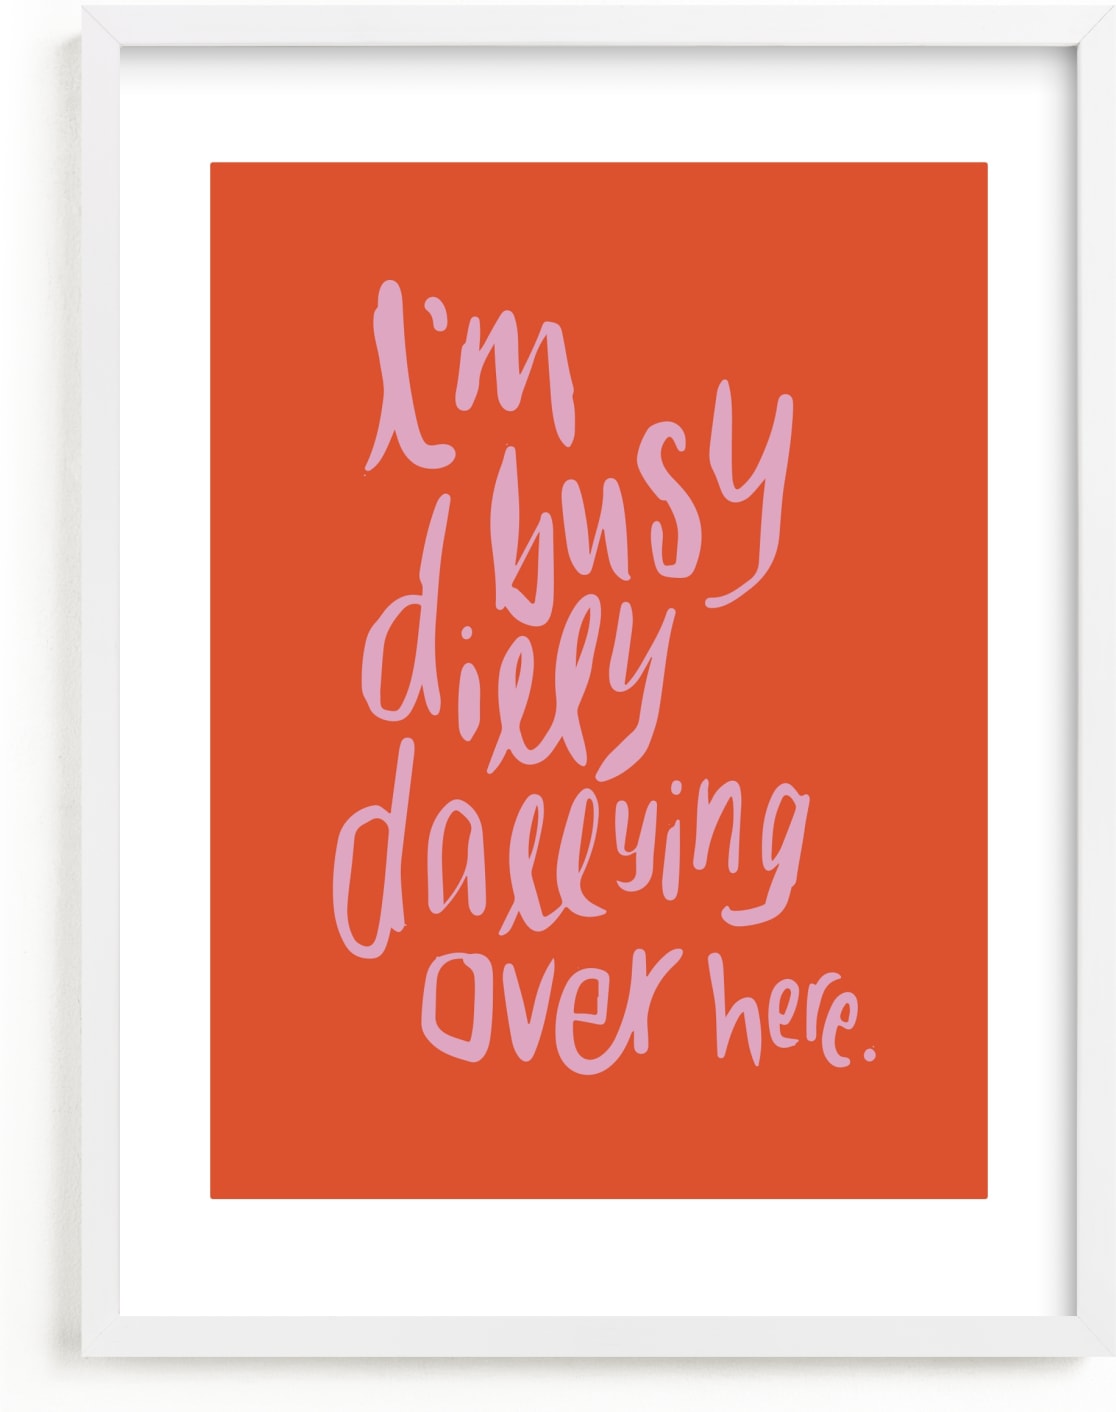 This is a orange, red kids wall art by Inkblot Design called Dillydally all day.